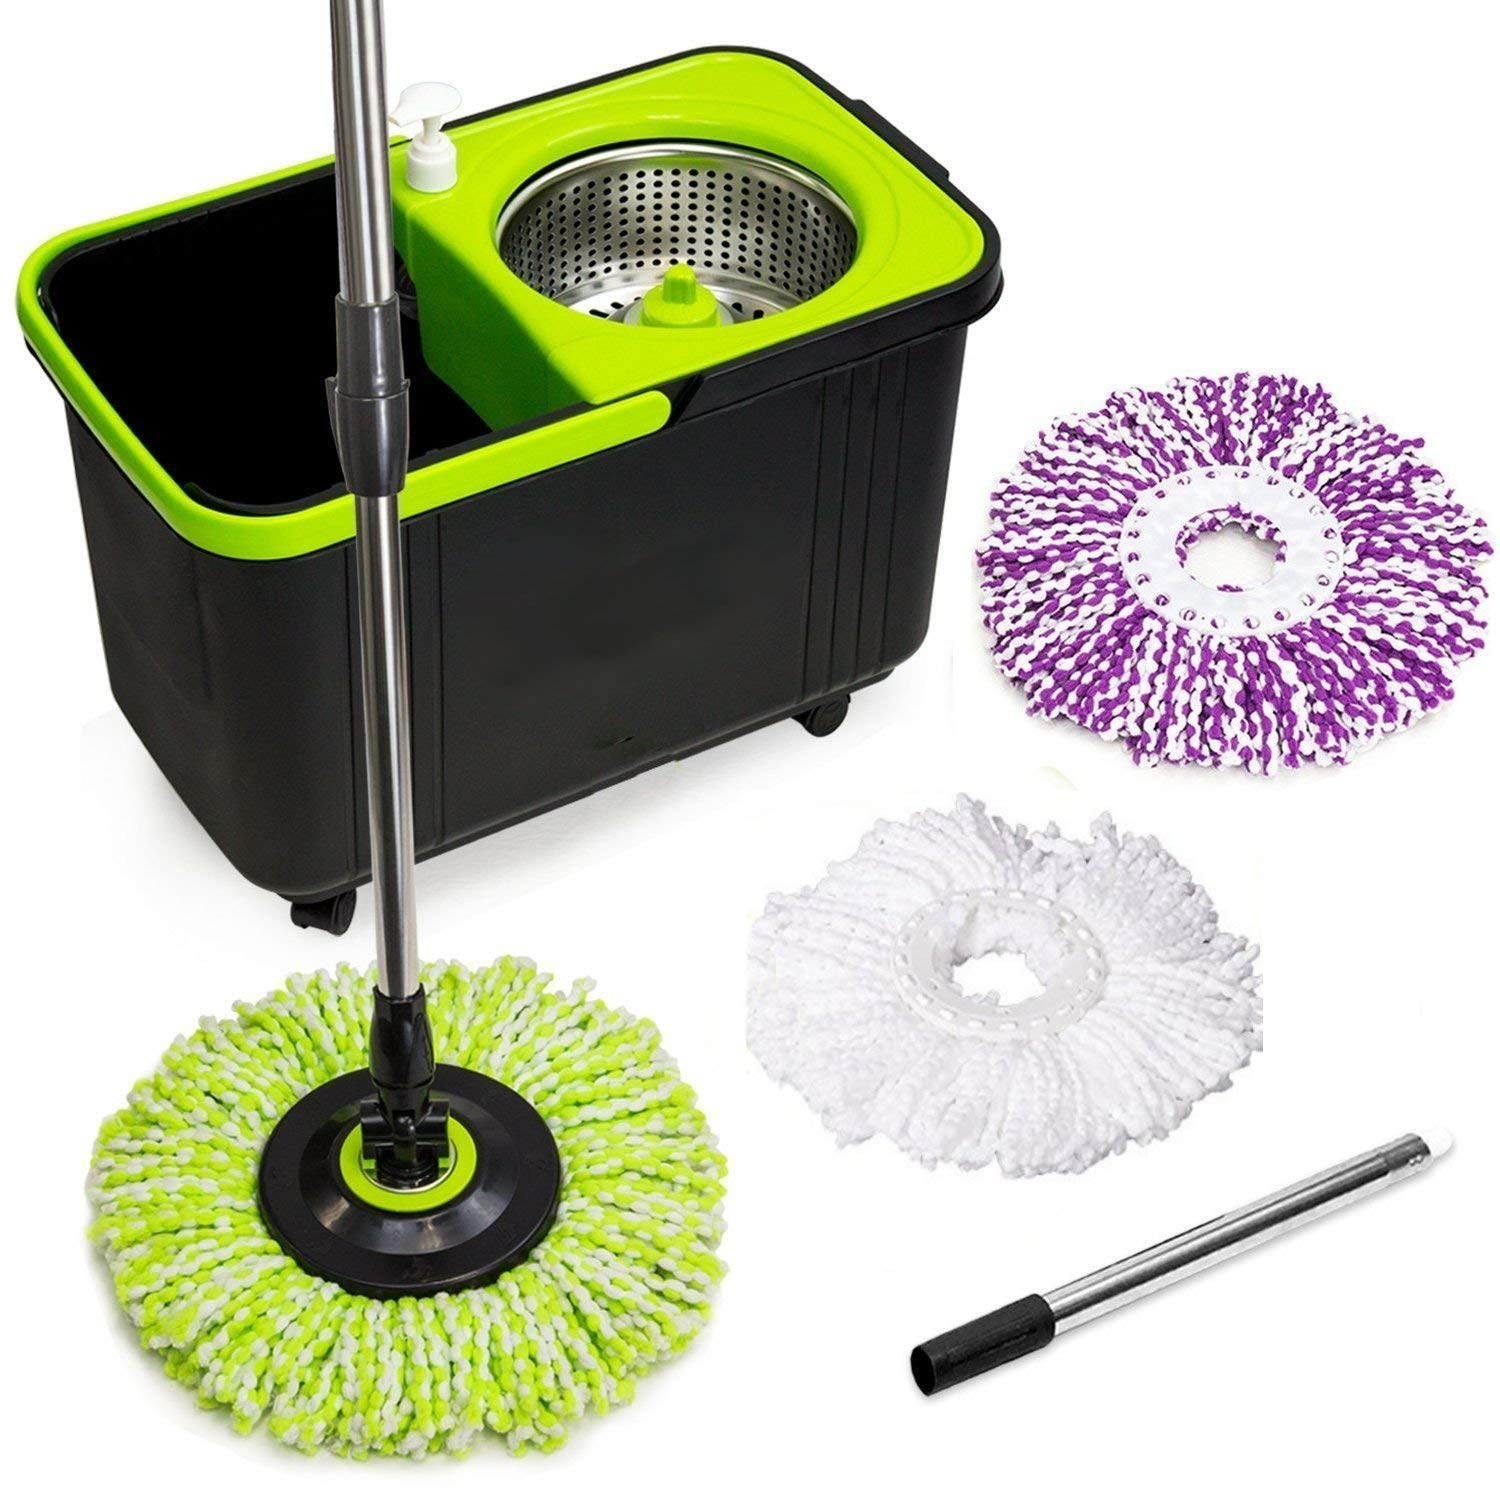 Spin Mop with 3 Mop Head Refills - The Clean Store